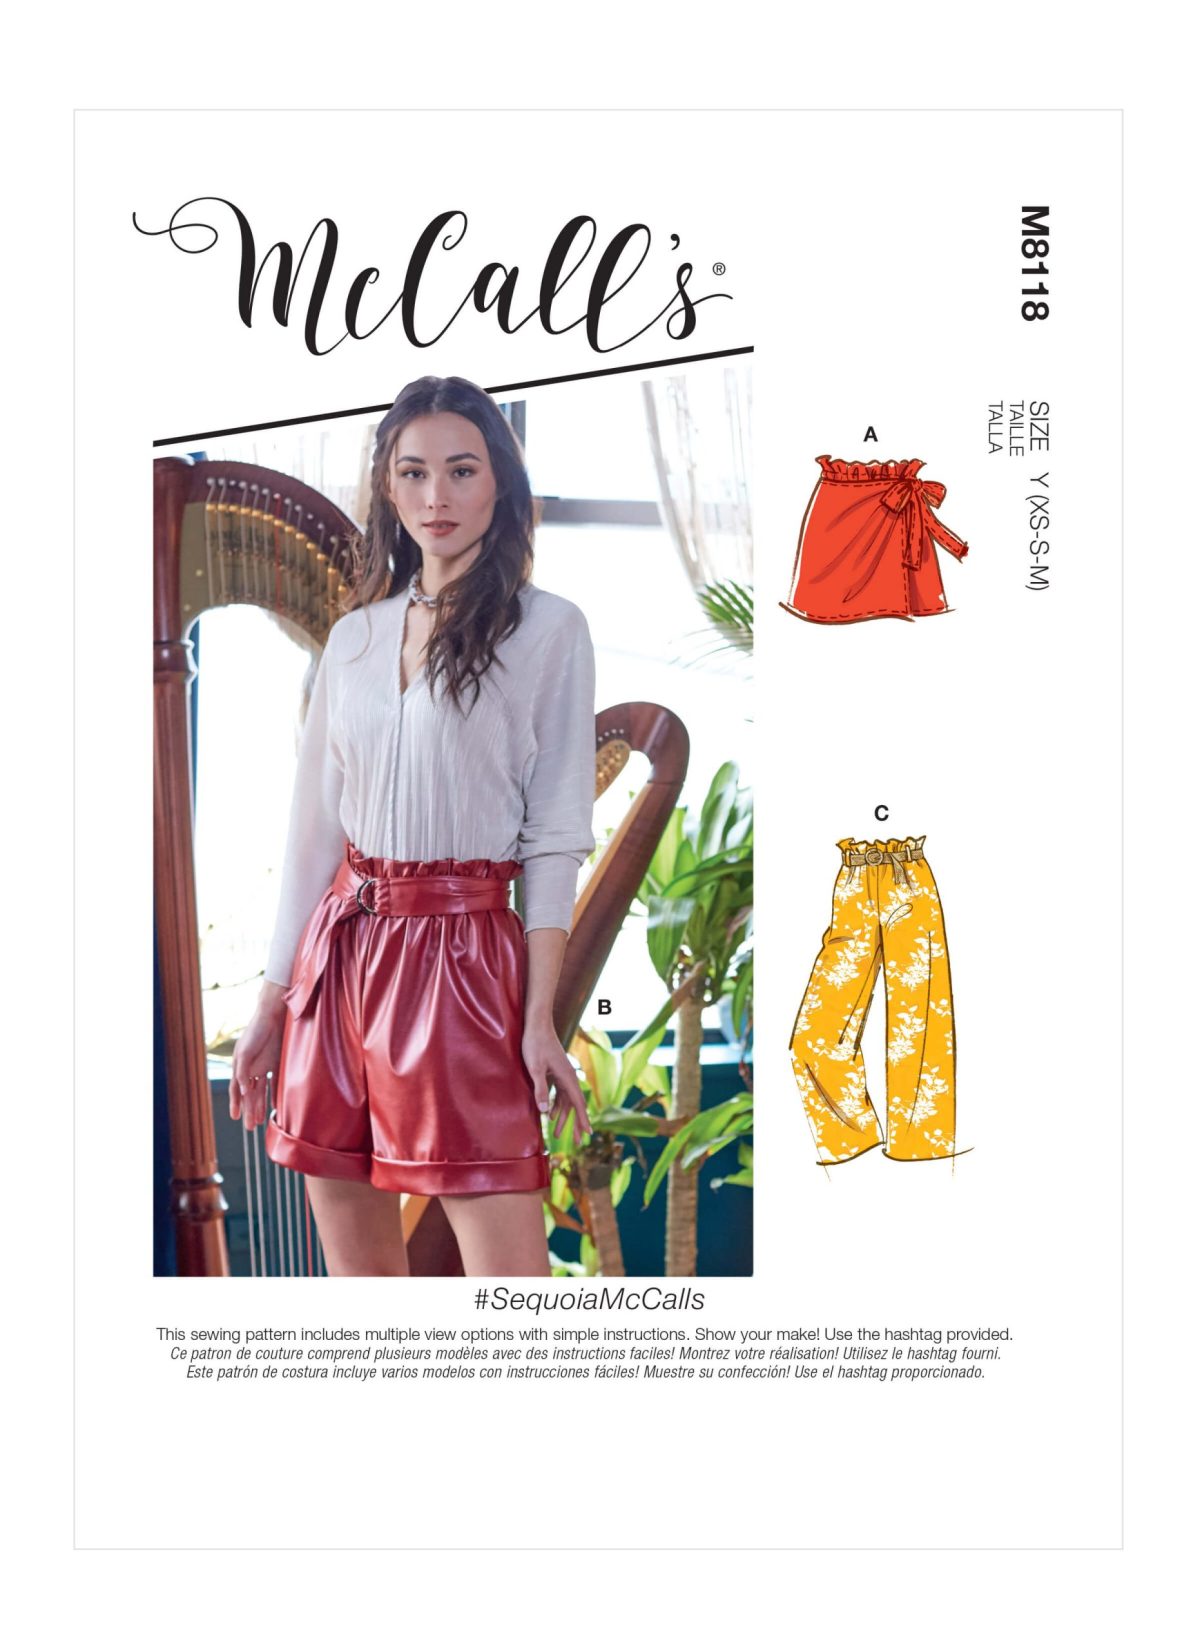 McCall's Sewing Pattern M8118 Misses' Shorts, Pants & Belt. #SequoiaMcCalls